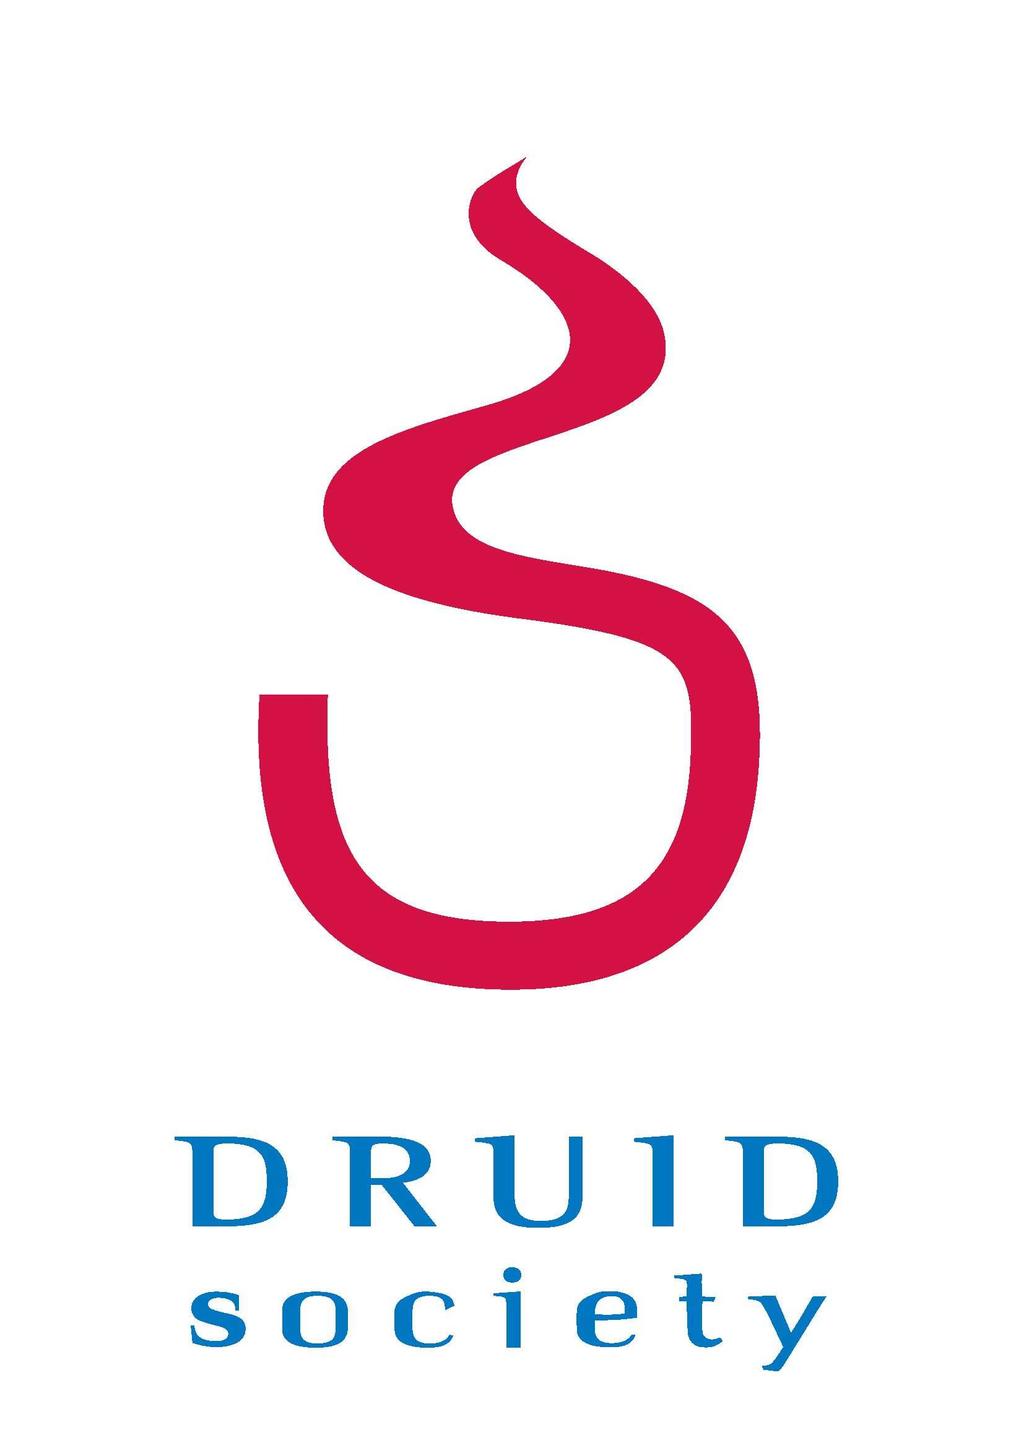 Paper to be presented at the DRUID Society Conference 2014, CBS, Copenhagen, June 16-18 A Decentralized Learning Equilibrium Andreas Blume University of Arizona Economics ablume@email.arizona.